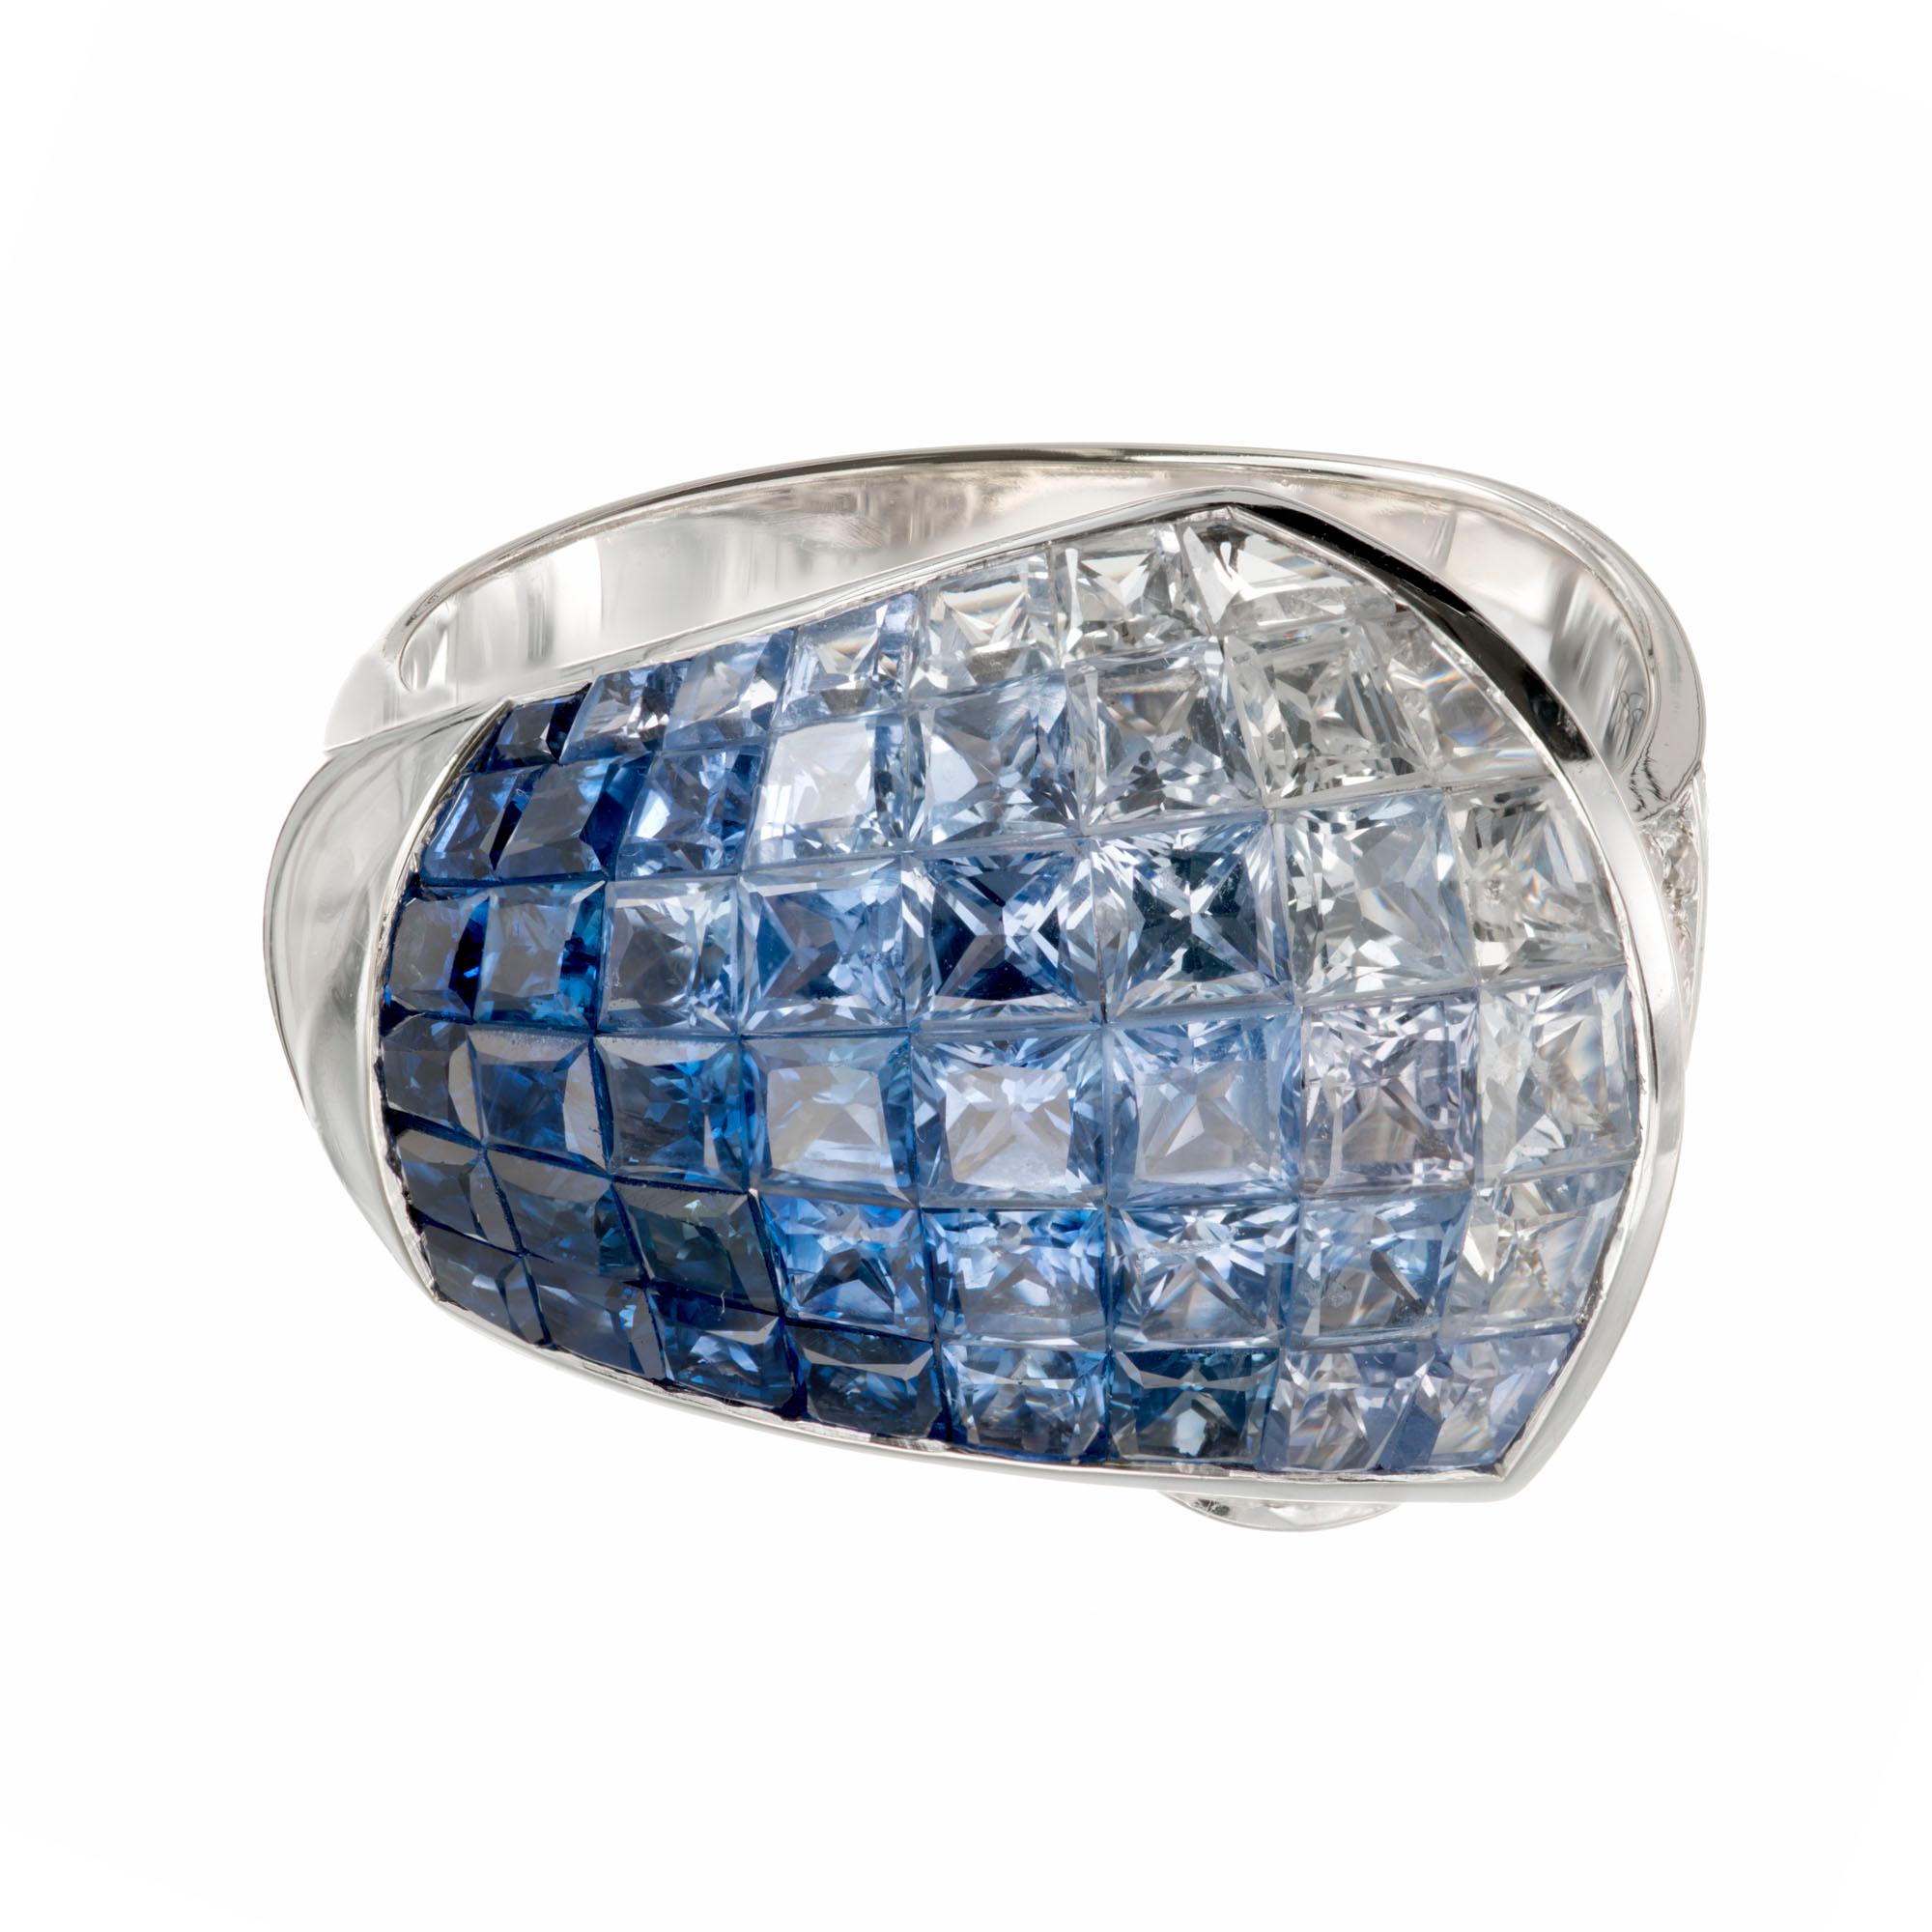 Sapphire and diamond white gold cocktail ring. Blue and white invisibly set, sapphires with white full cut diamonds. Sapphires are blended blue to white. Contrasted by full cut white brilliant diamonds. 

47 genuine invisible set custom cut